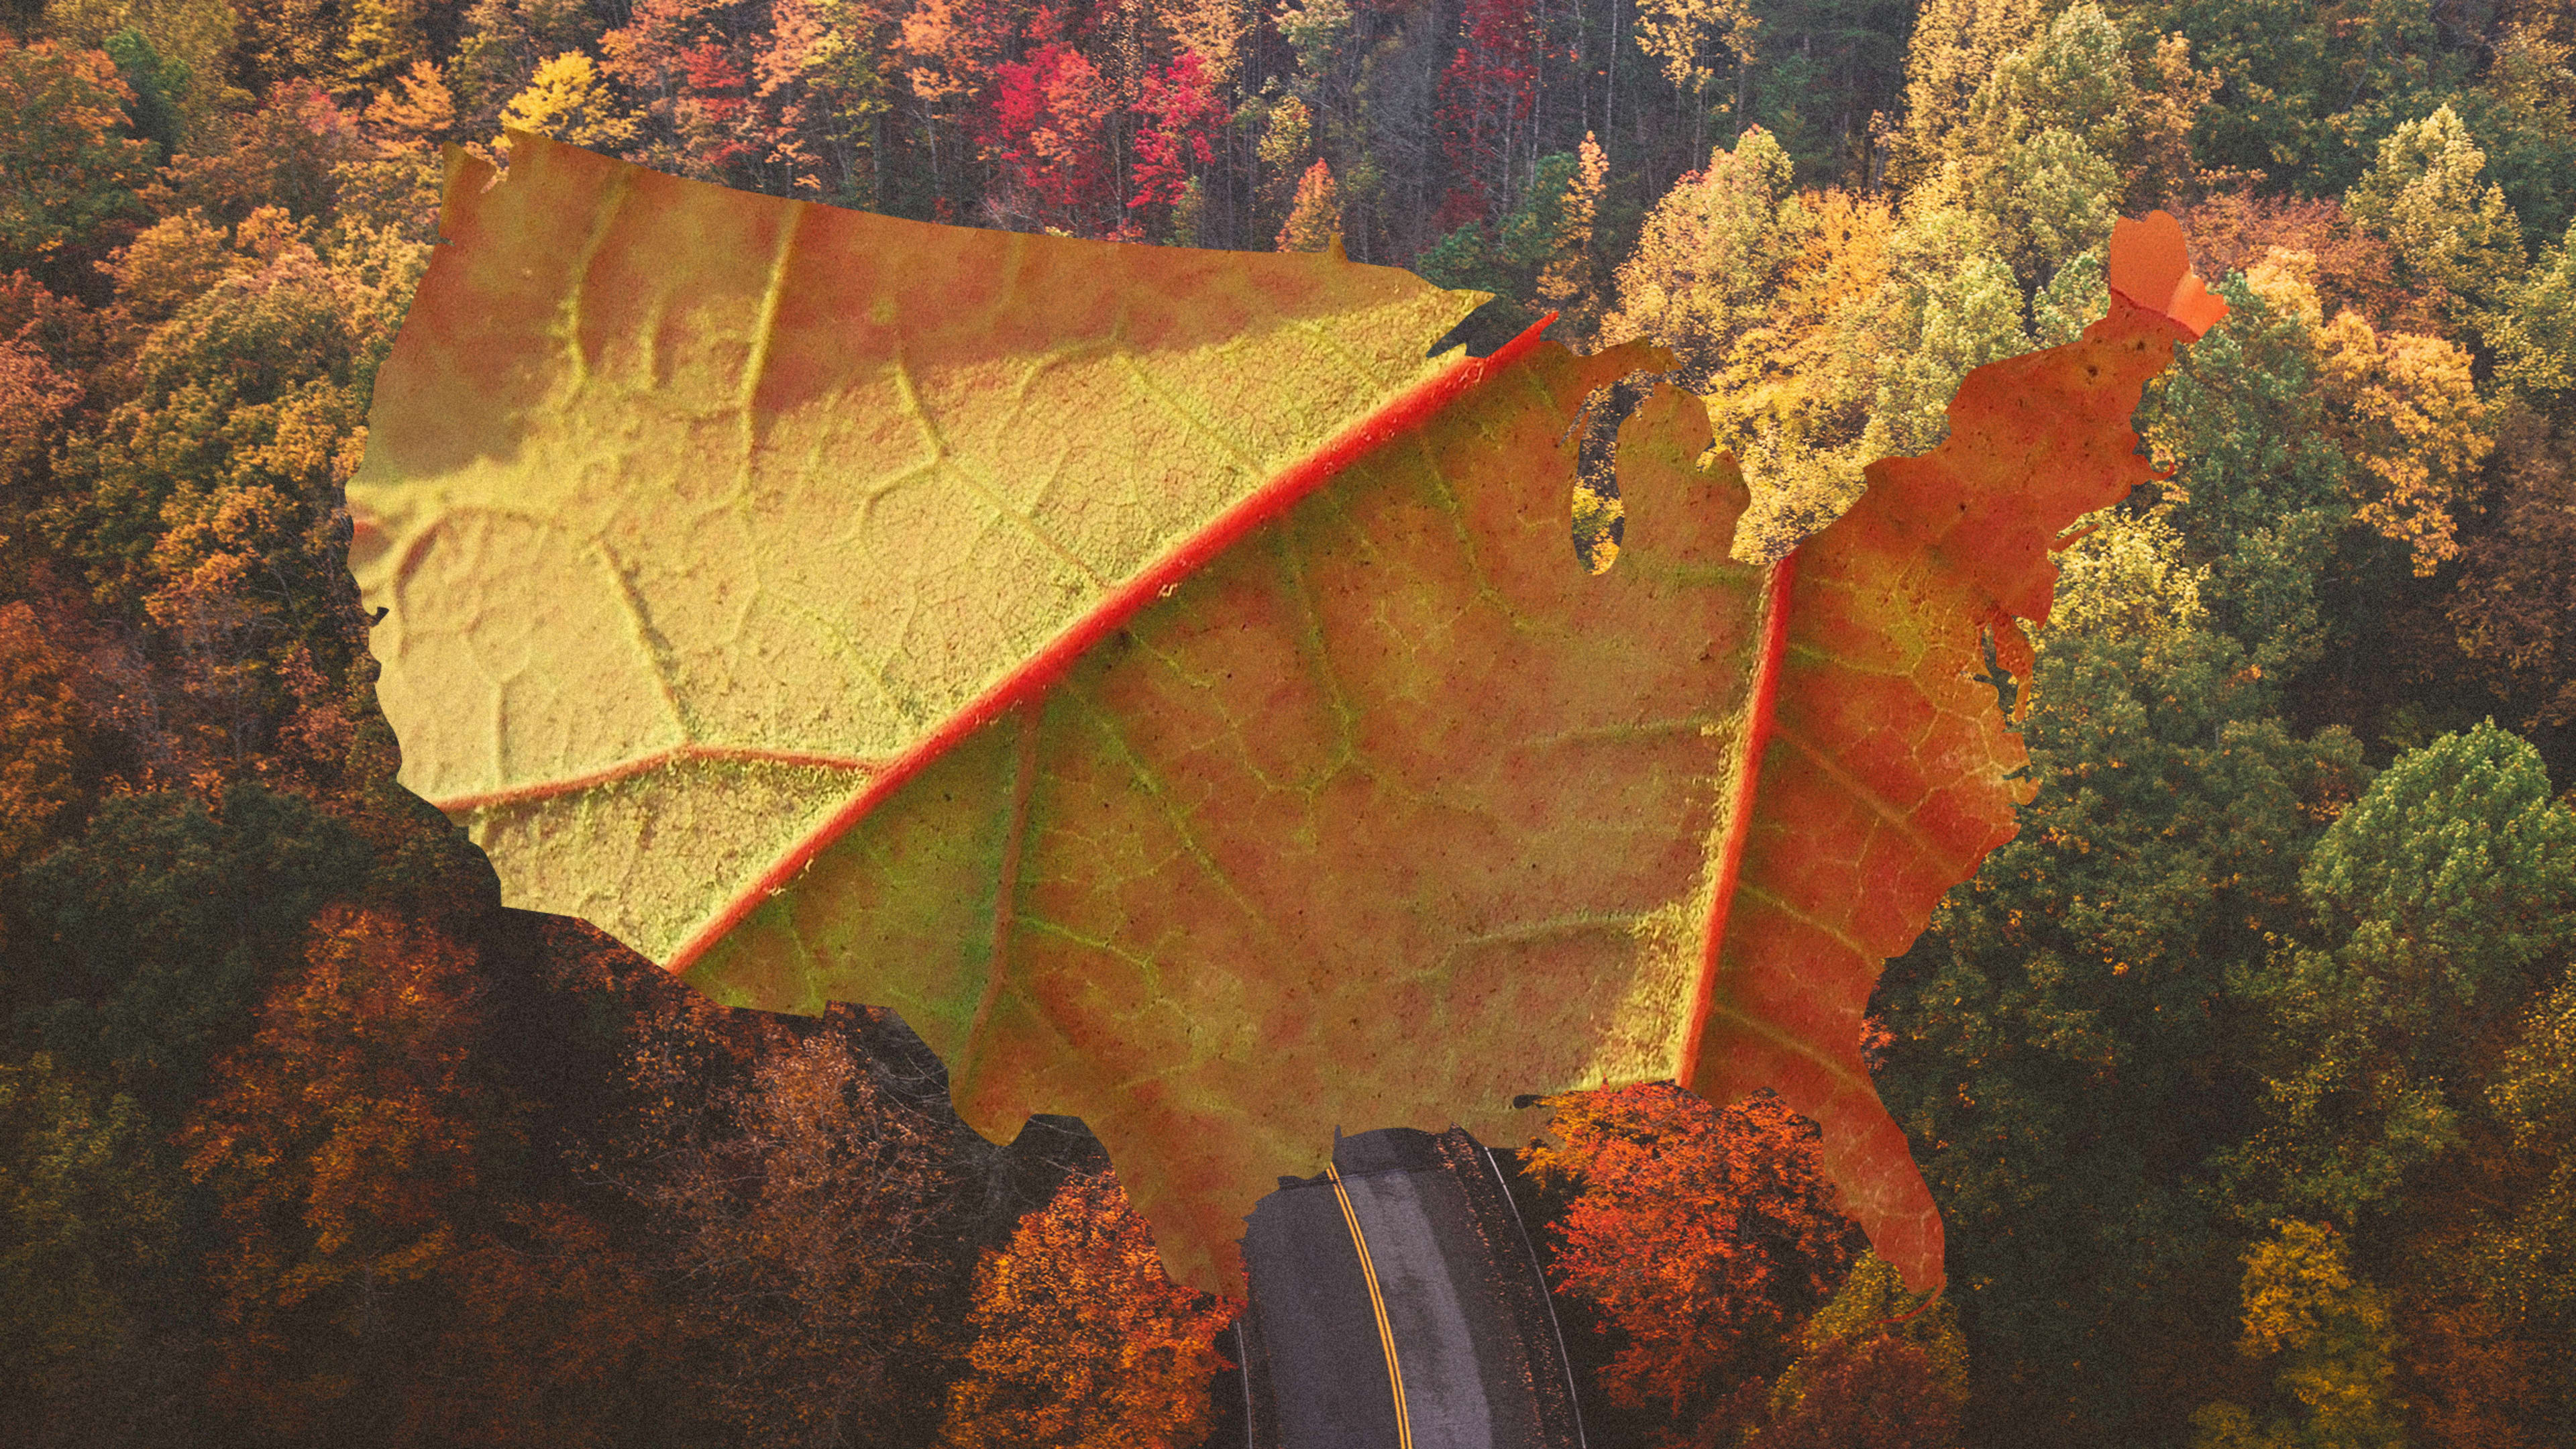 The most beautiful map of fall foliage we’ve ever seen